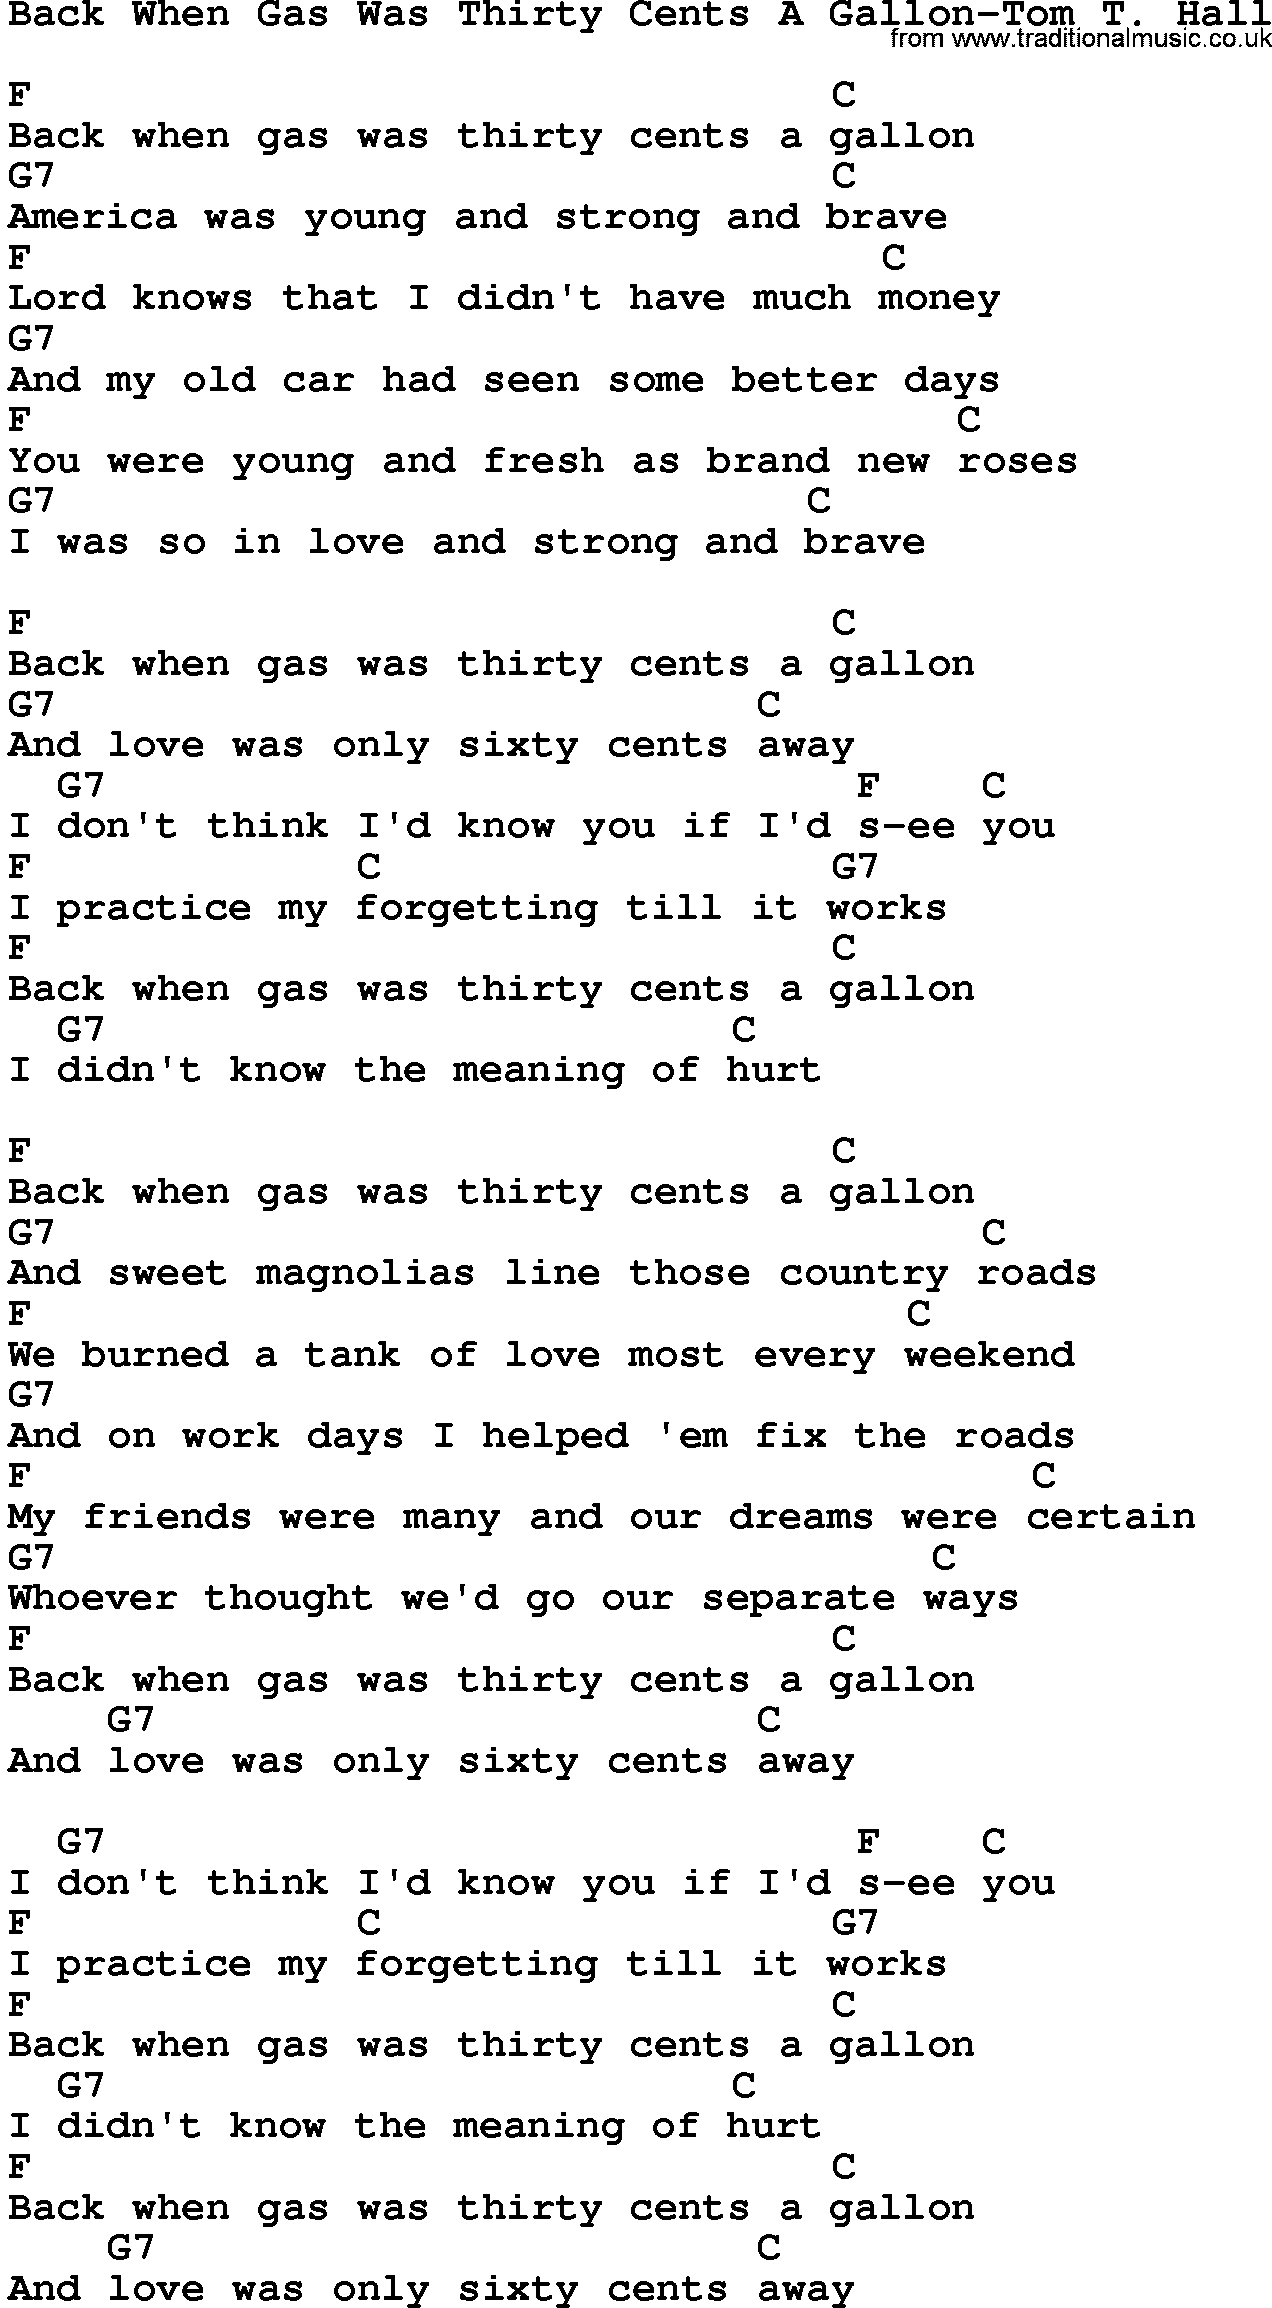 Country music song: Back When Gas Was Thirty Cents A Gallon-Tom T Hall lyrics and chords